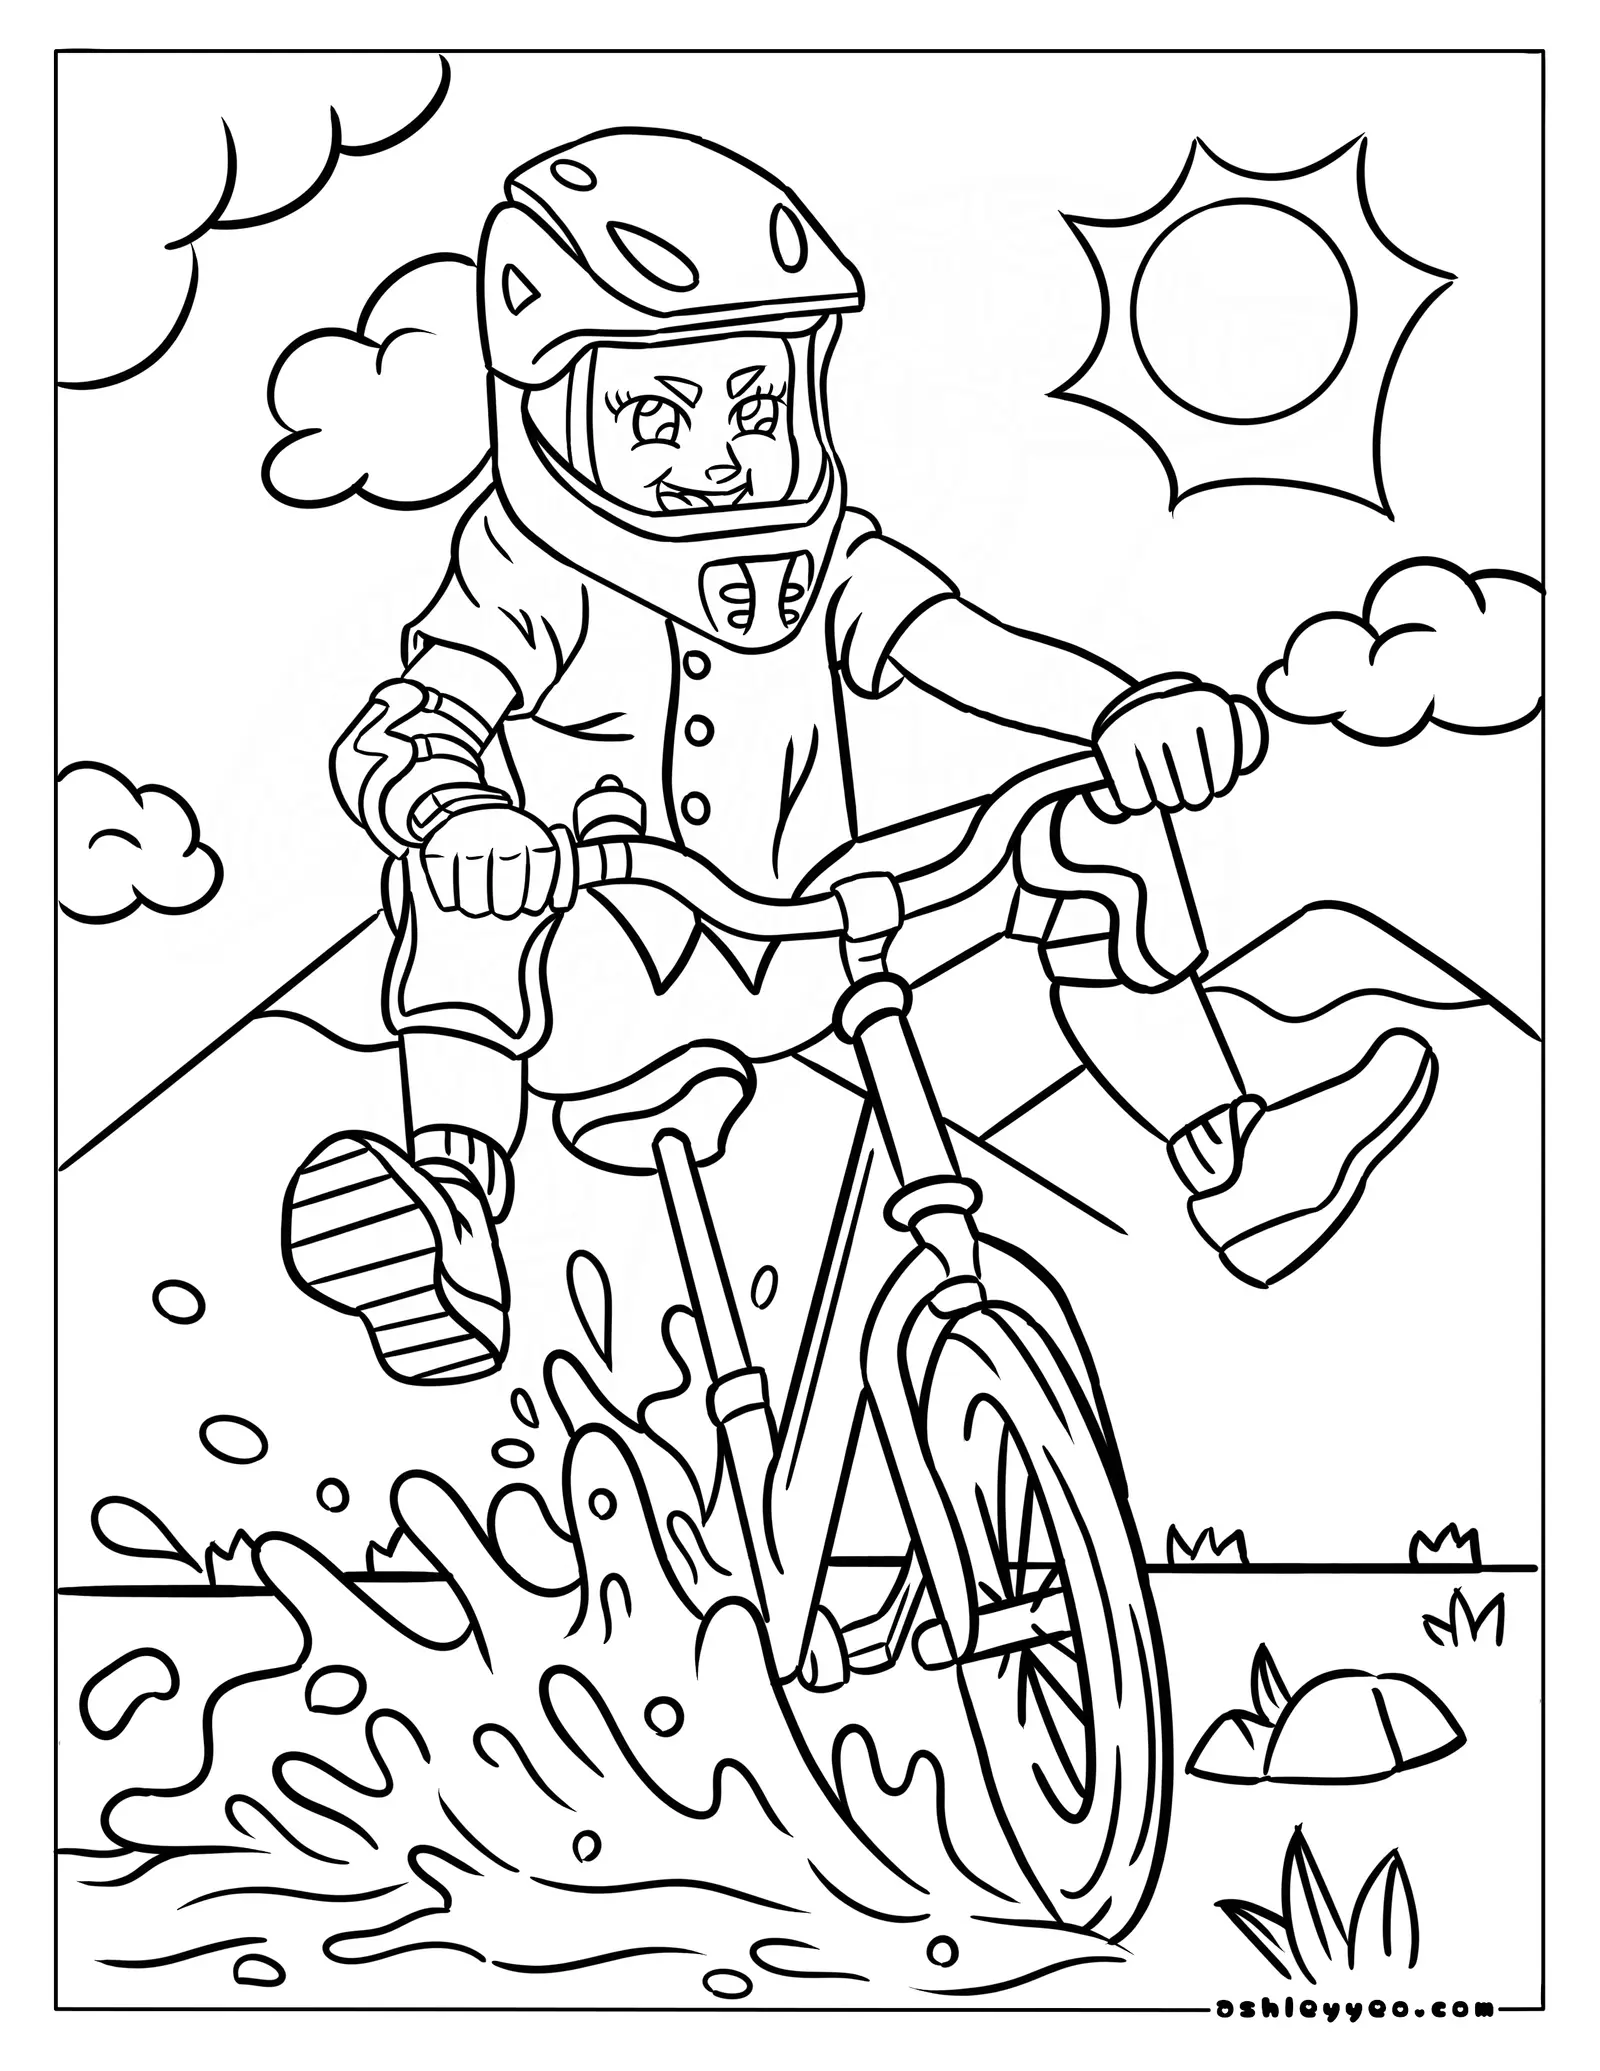 Mountain Biking Coloring Pages